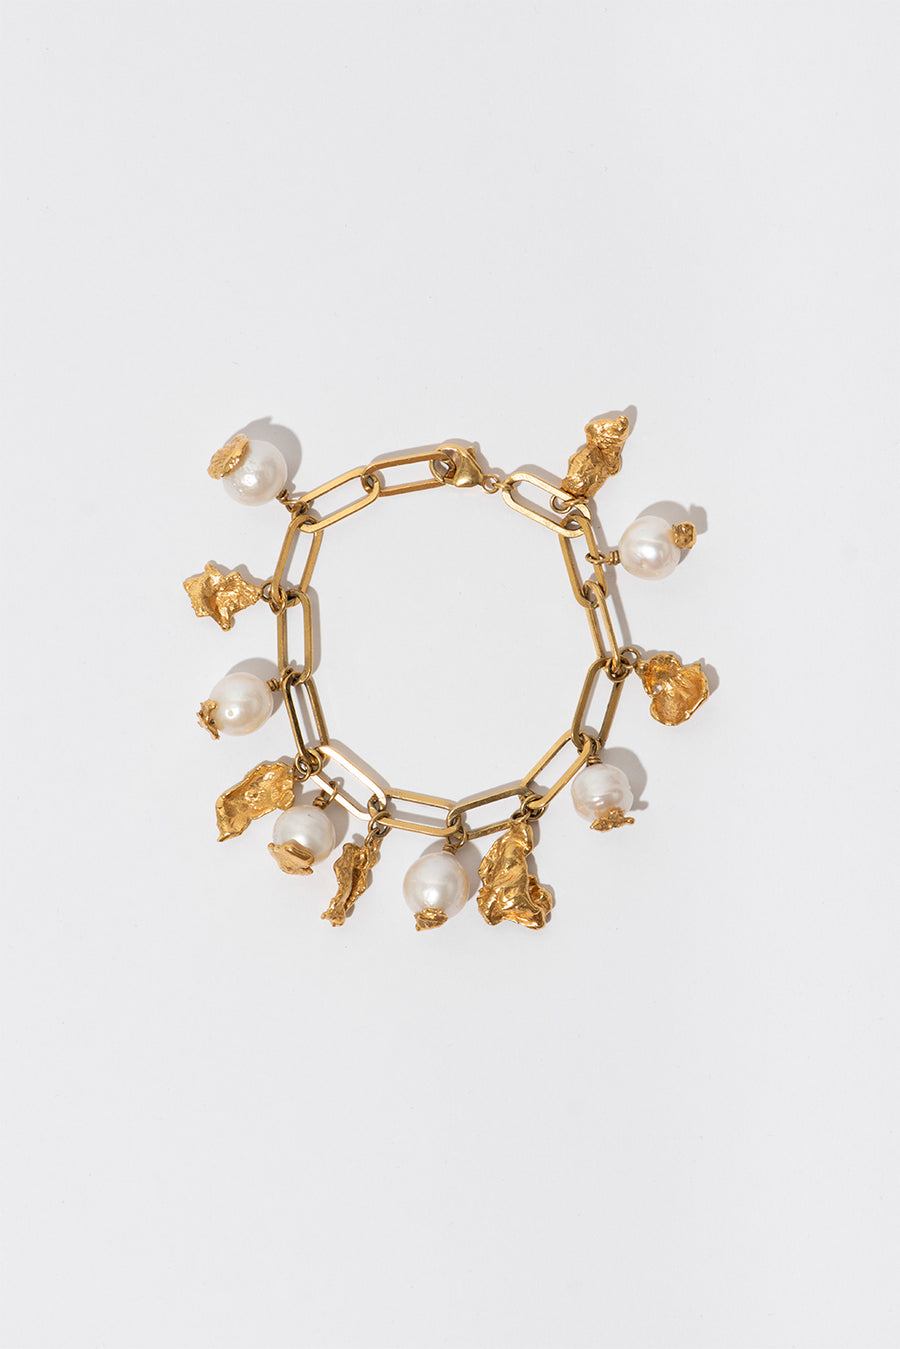 The Chain Pearl Bracelet